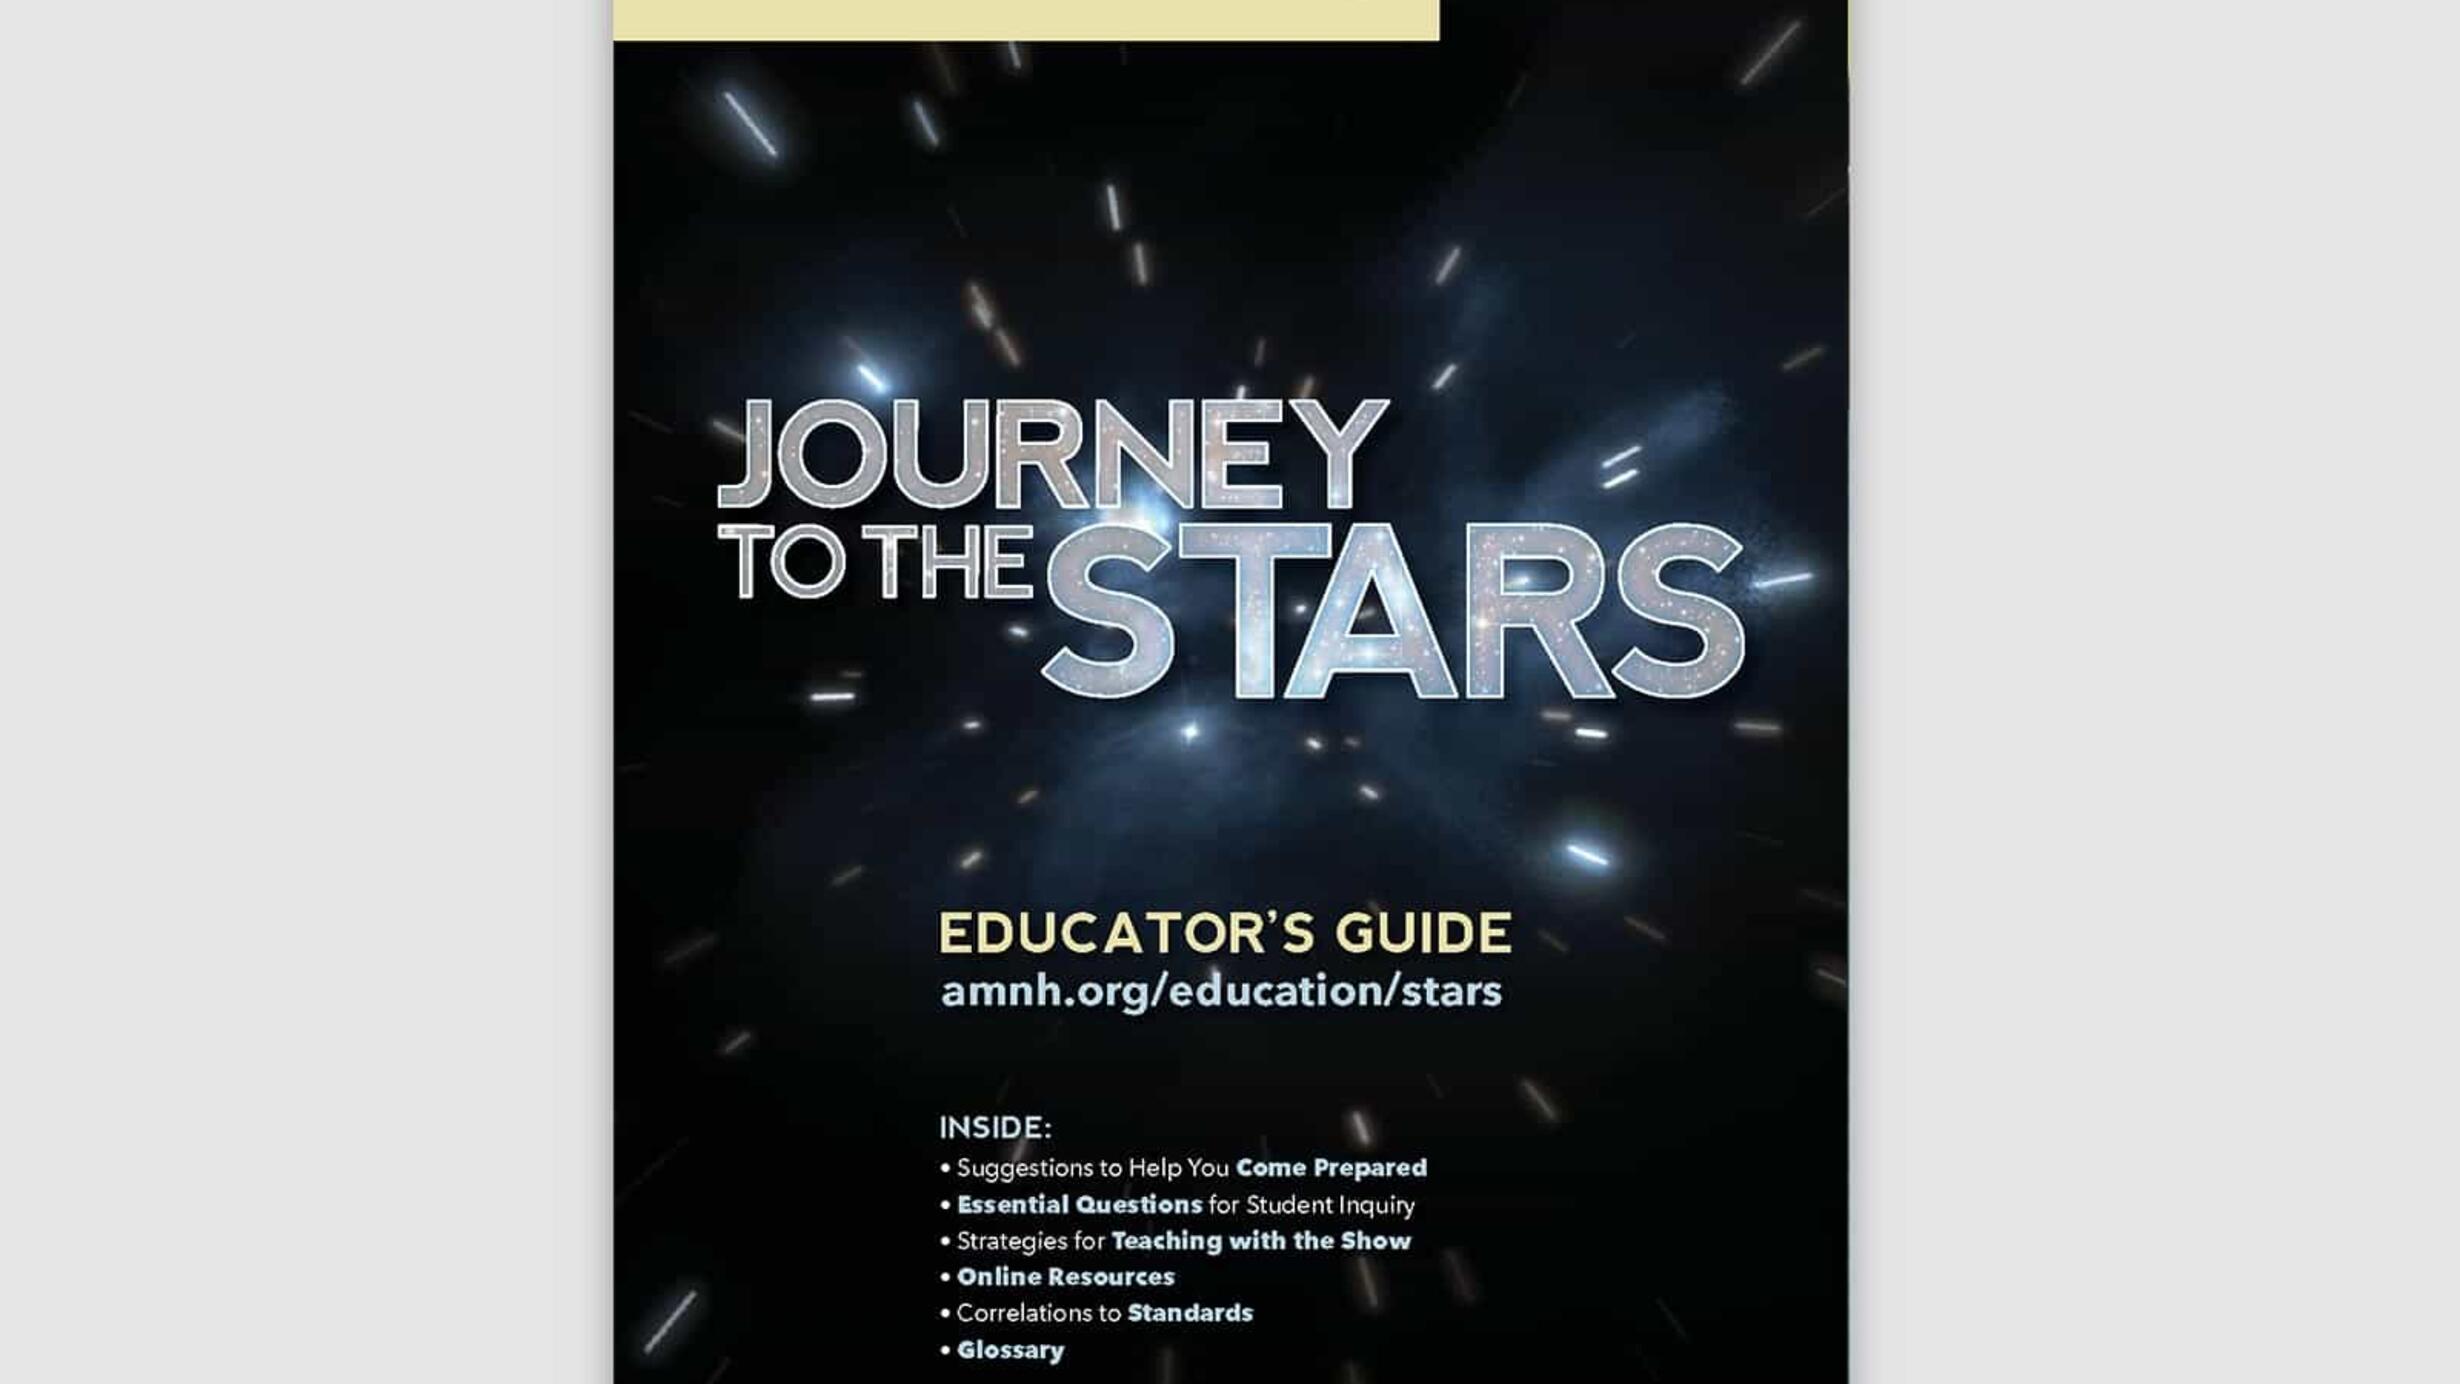 Cover of an Educator's Guide titled "Journey to the Stars" with text over background image of stars in space forming a tunnel shape.